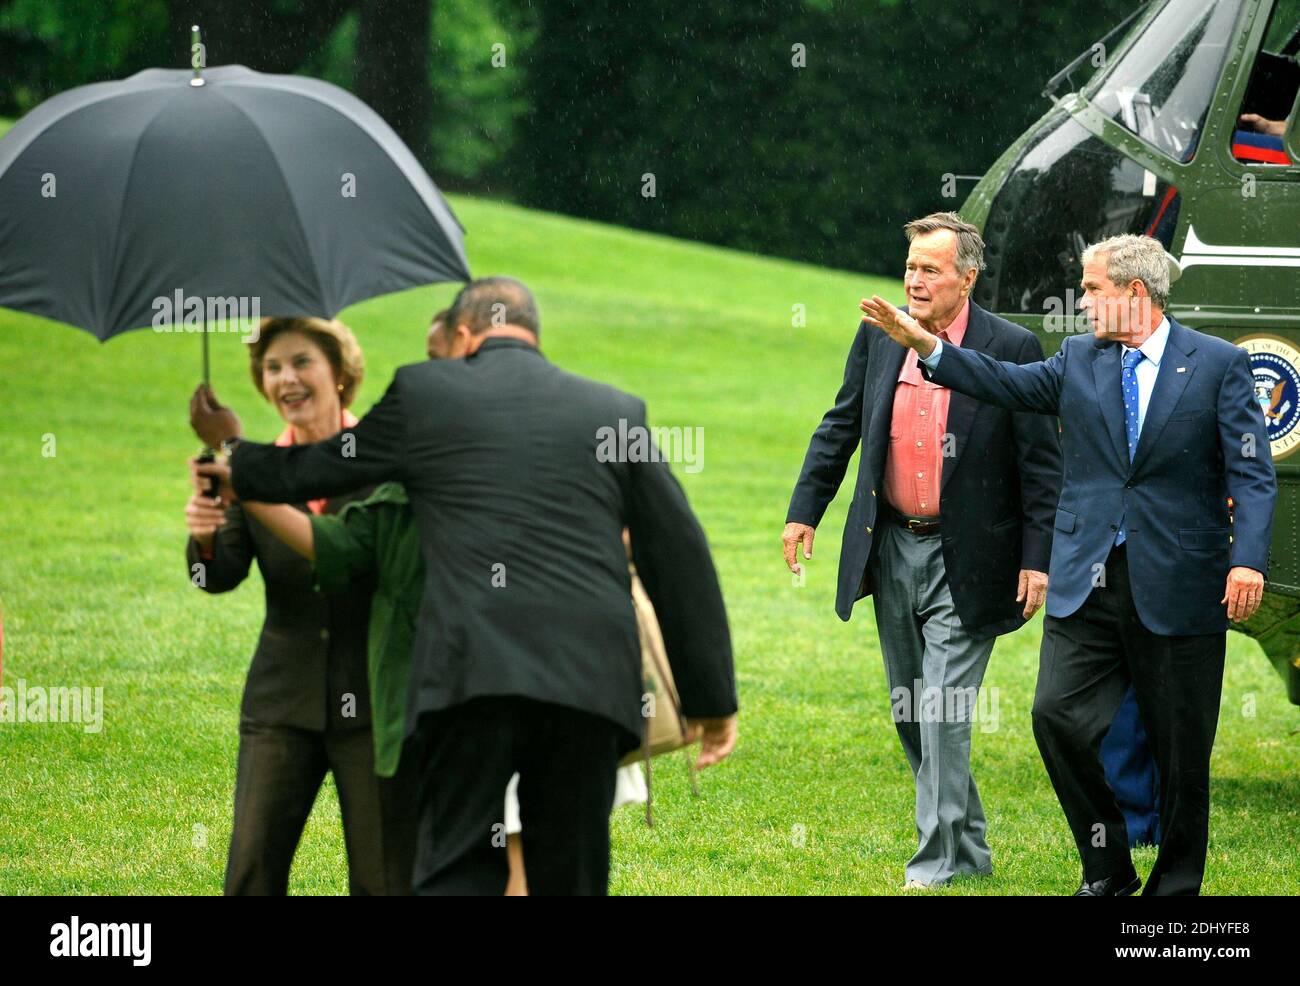 Former United States President George H.W. Bush (2nd,R) walks with US President George W. Bush as an aide assists first lady Laura Bush with an umbrella as they arrive at the White House from a weekend at the Crawford, Texas ranch, 11 May 2008 in Washington, DC, USA. Bush, whose daughter Jenna married Henry Hager at the ranch, described the experience as 'spectacular' and 'it's all we could have hoped for'. Photo by Mike Theiler/CNP/ABACAPRESS.COM Stock Photo